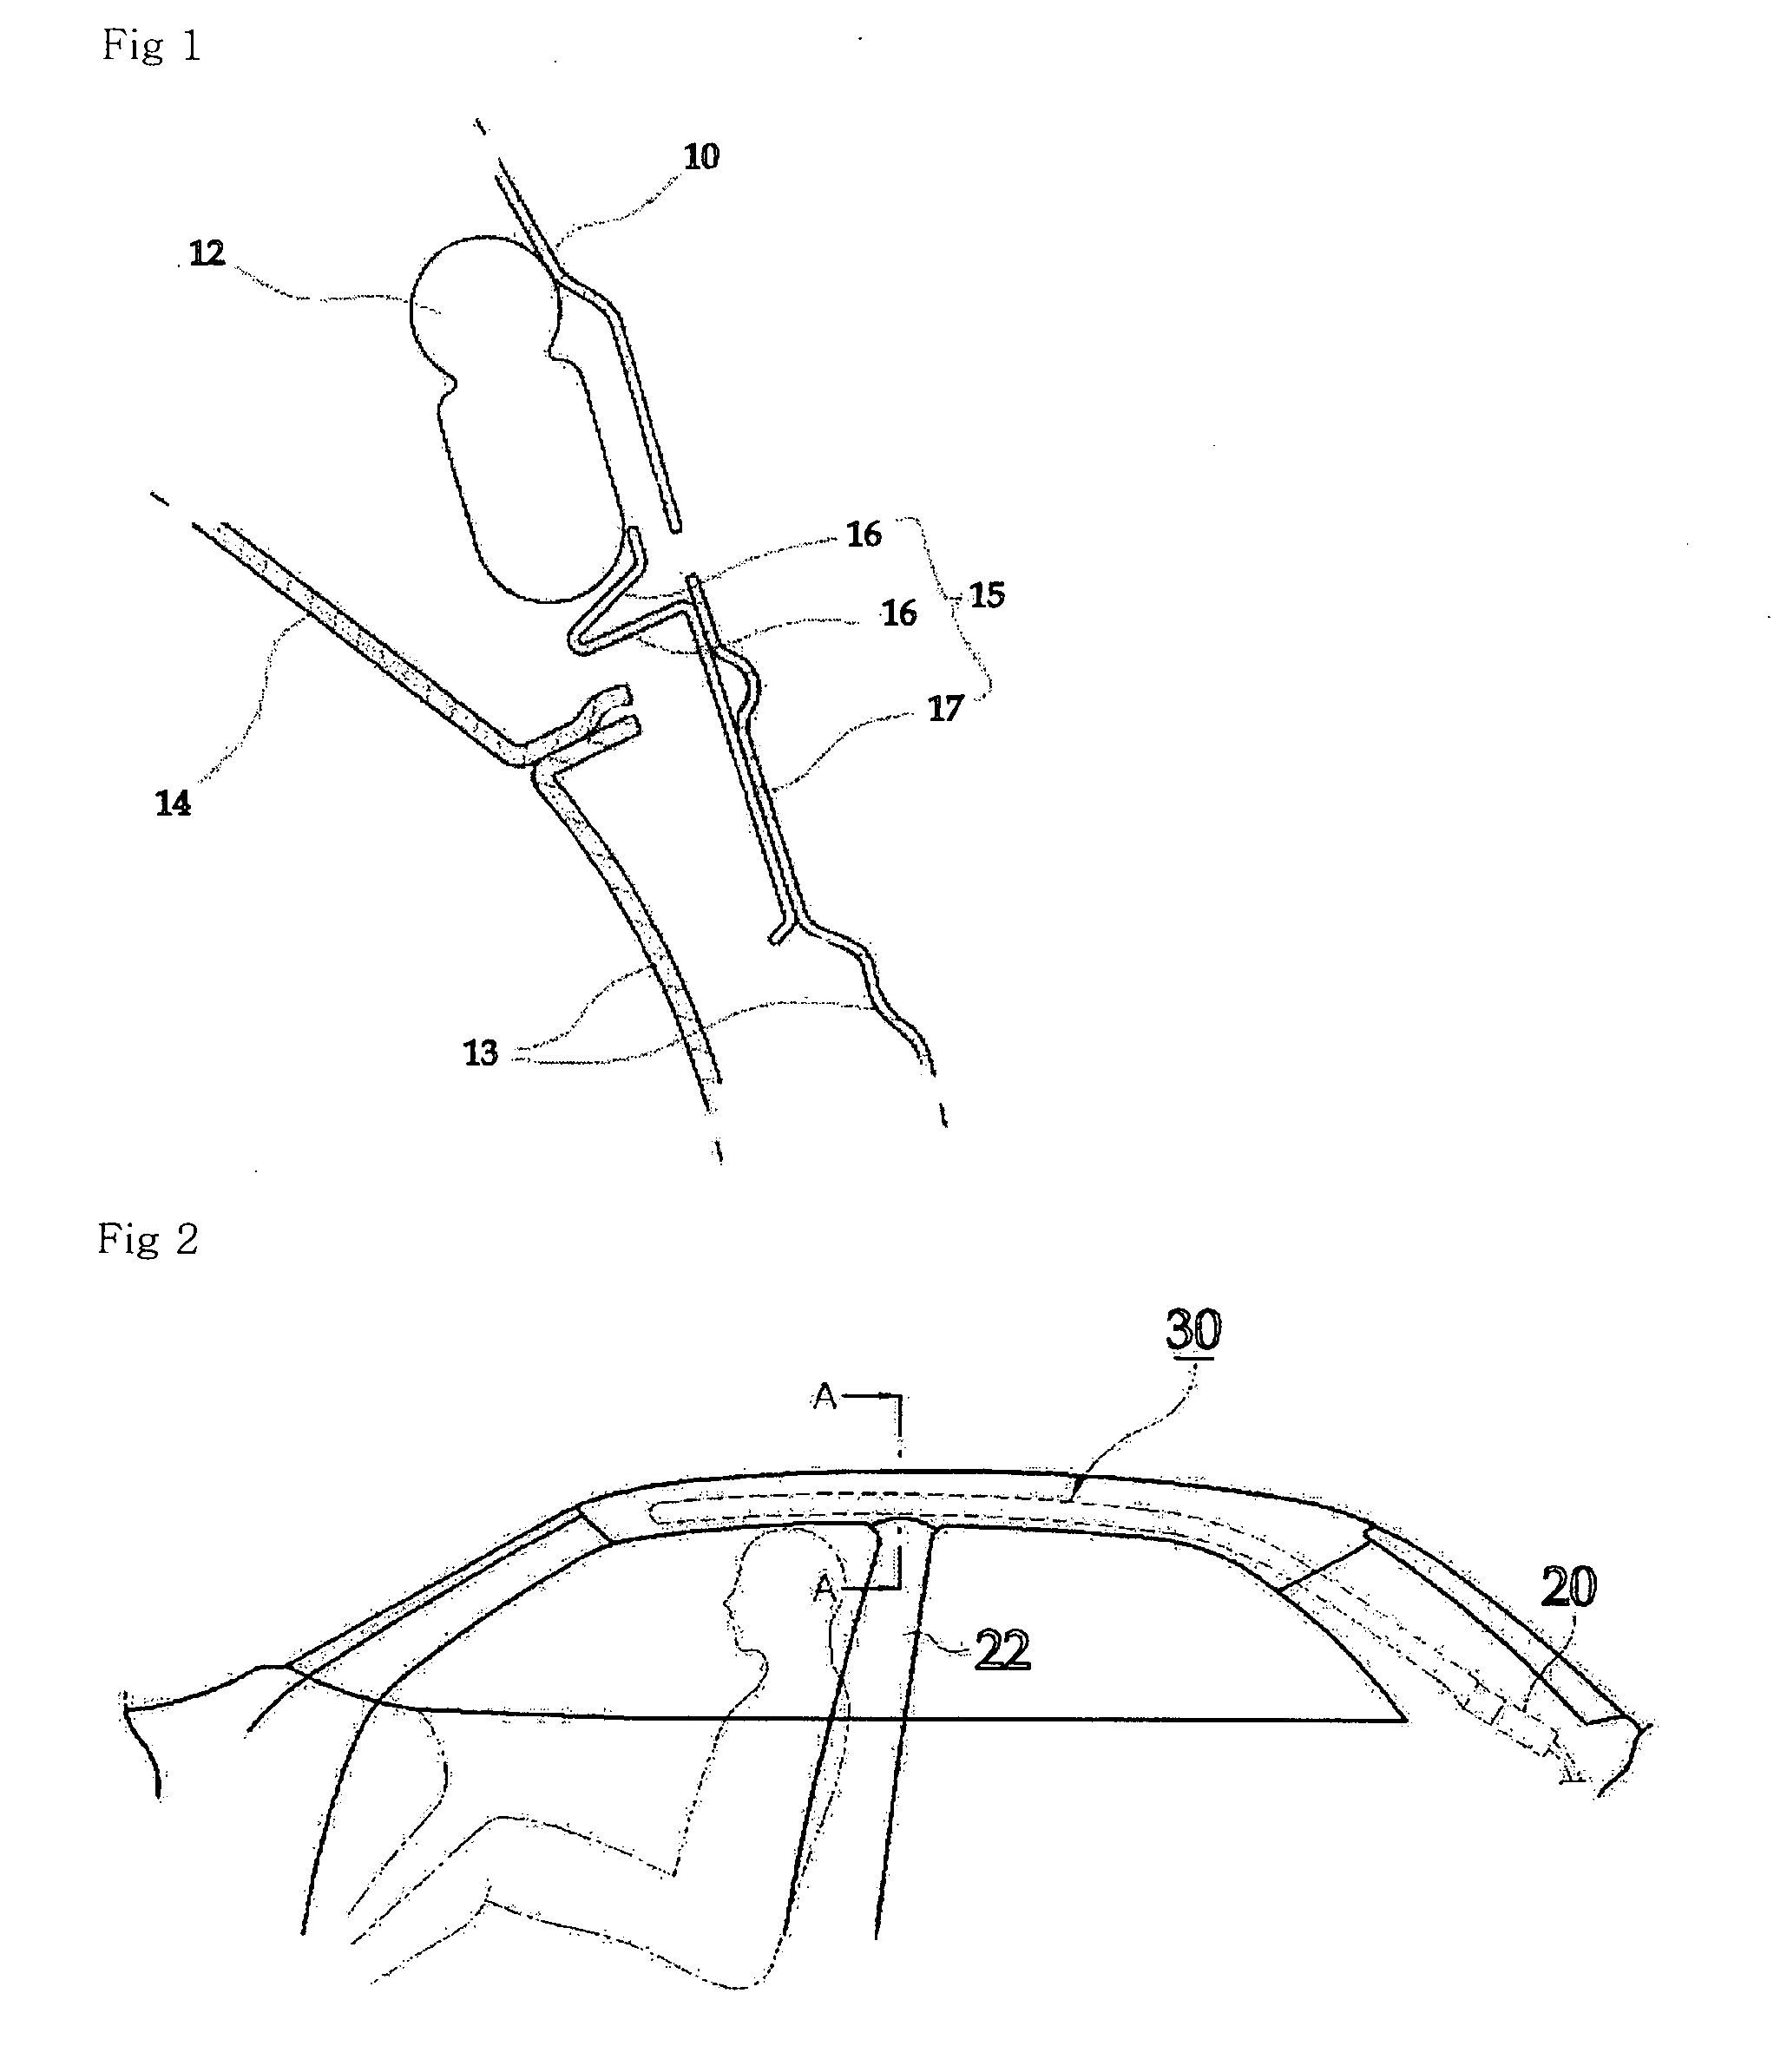 Guide plate for side air bag